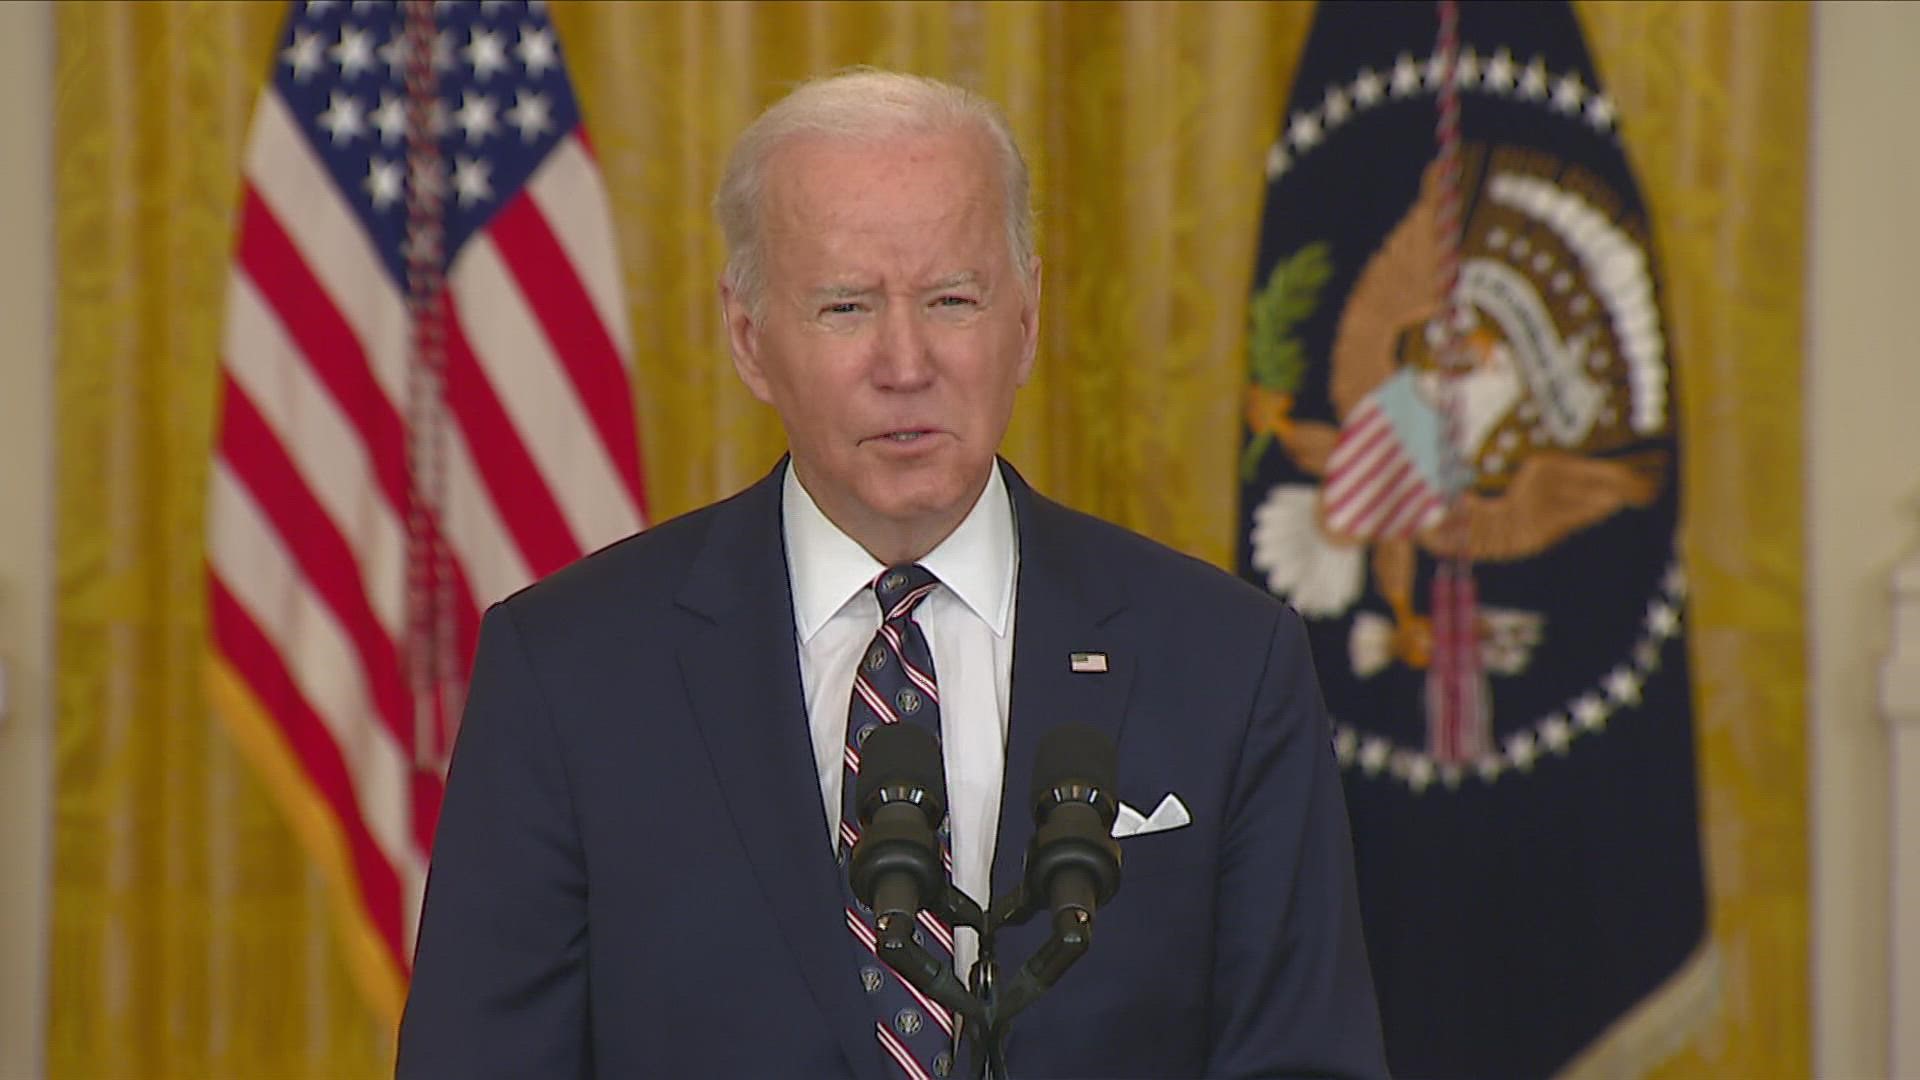 President Biden also confirmed that US troops would be moving to reinforce protections for NATO Baltic allies.